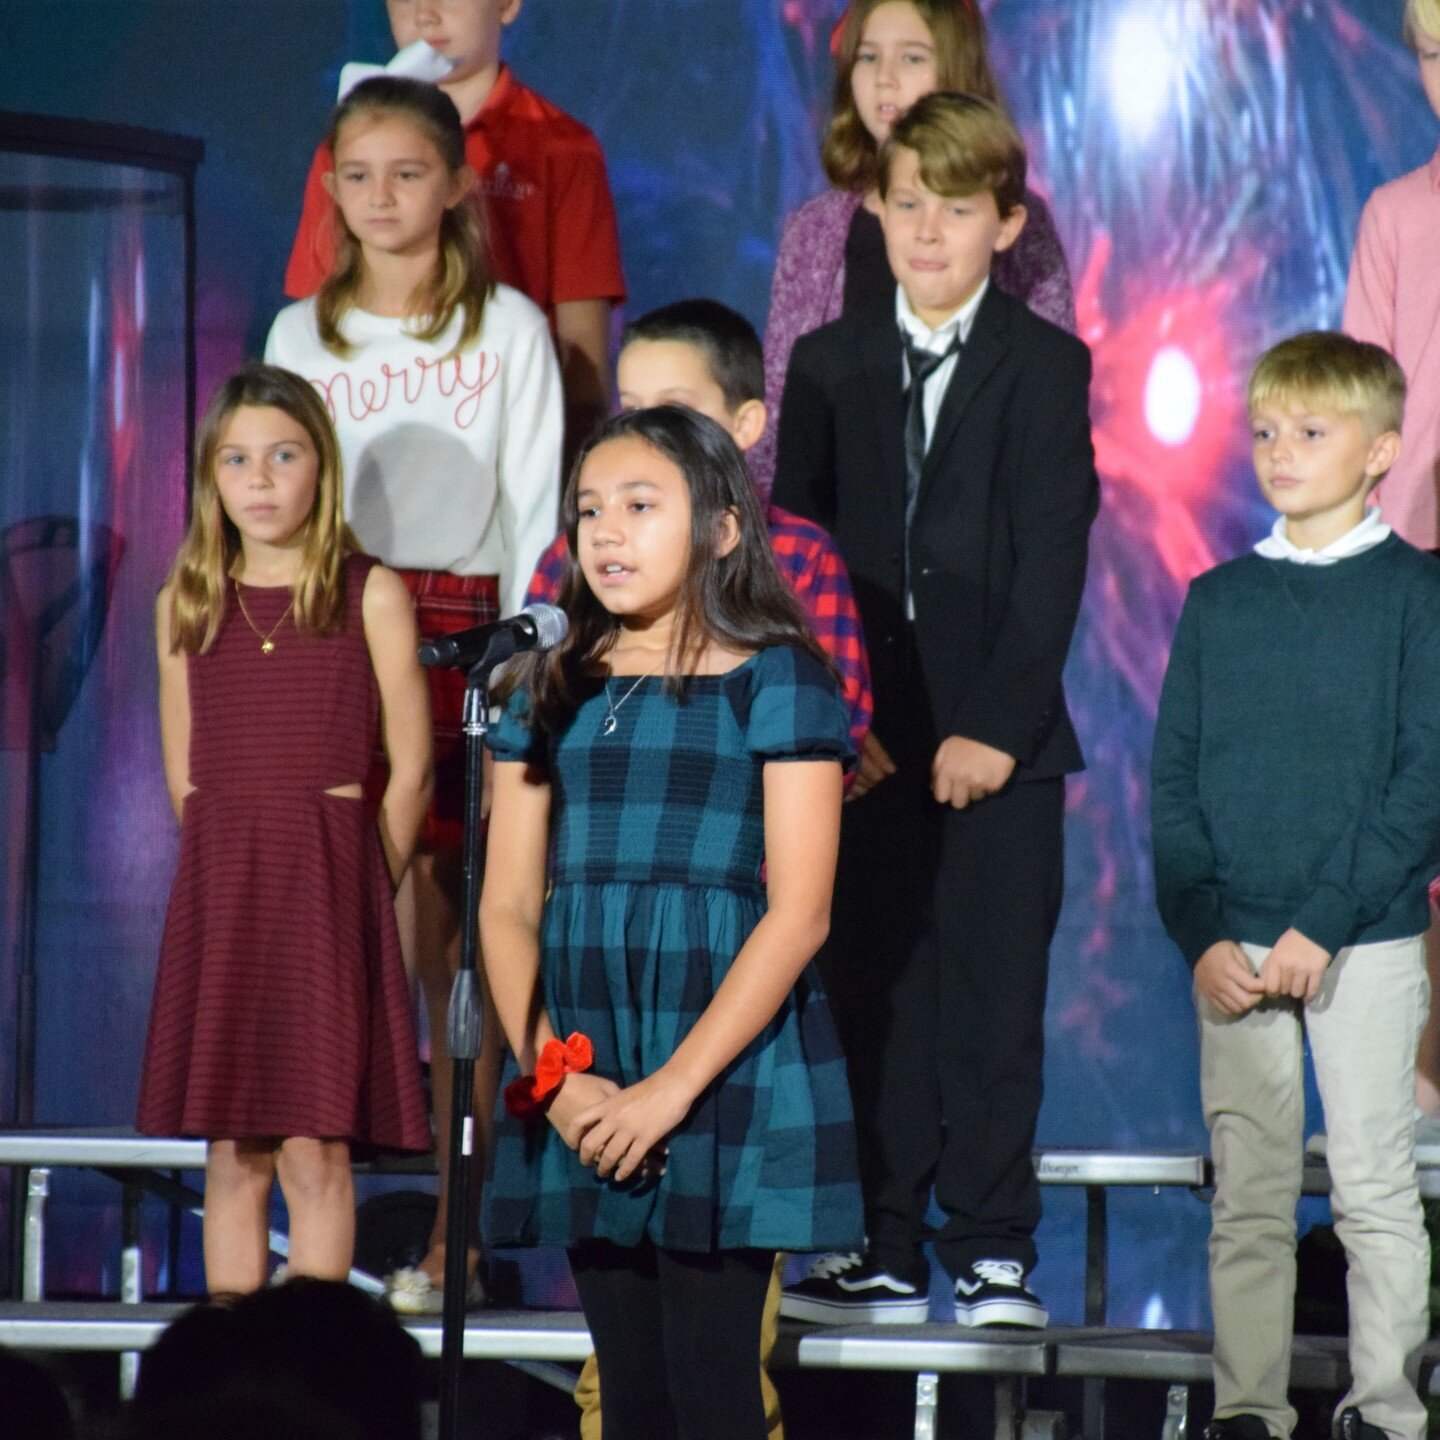 Merry Christmas! Our elementary students got into the holiday spirit while reminding us what the season is all about through their moving performance of &quot;A Classic Christmas&quot;.

&quot;For to us a child is born, to us a son is given, and the 